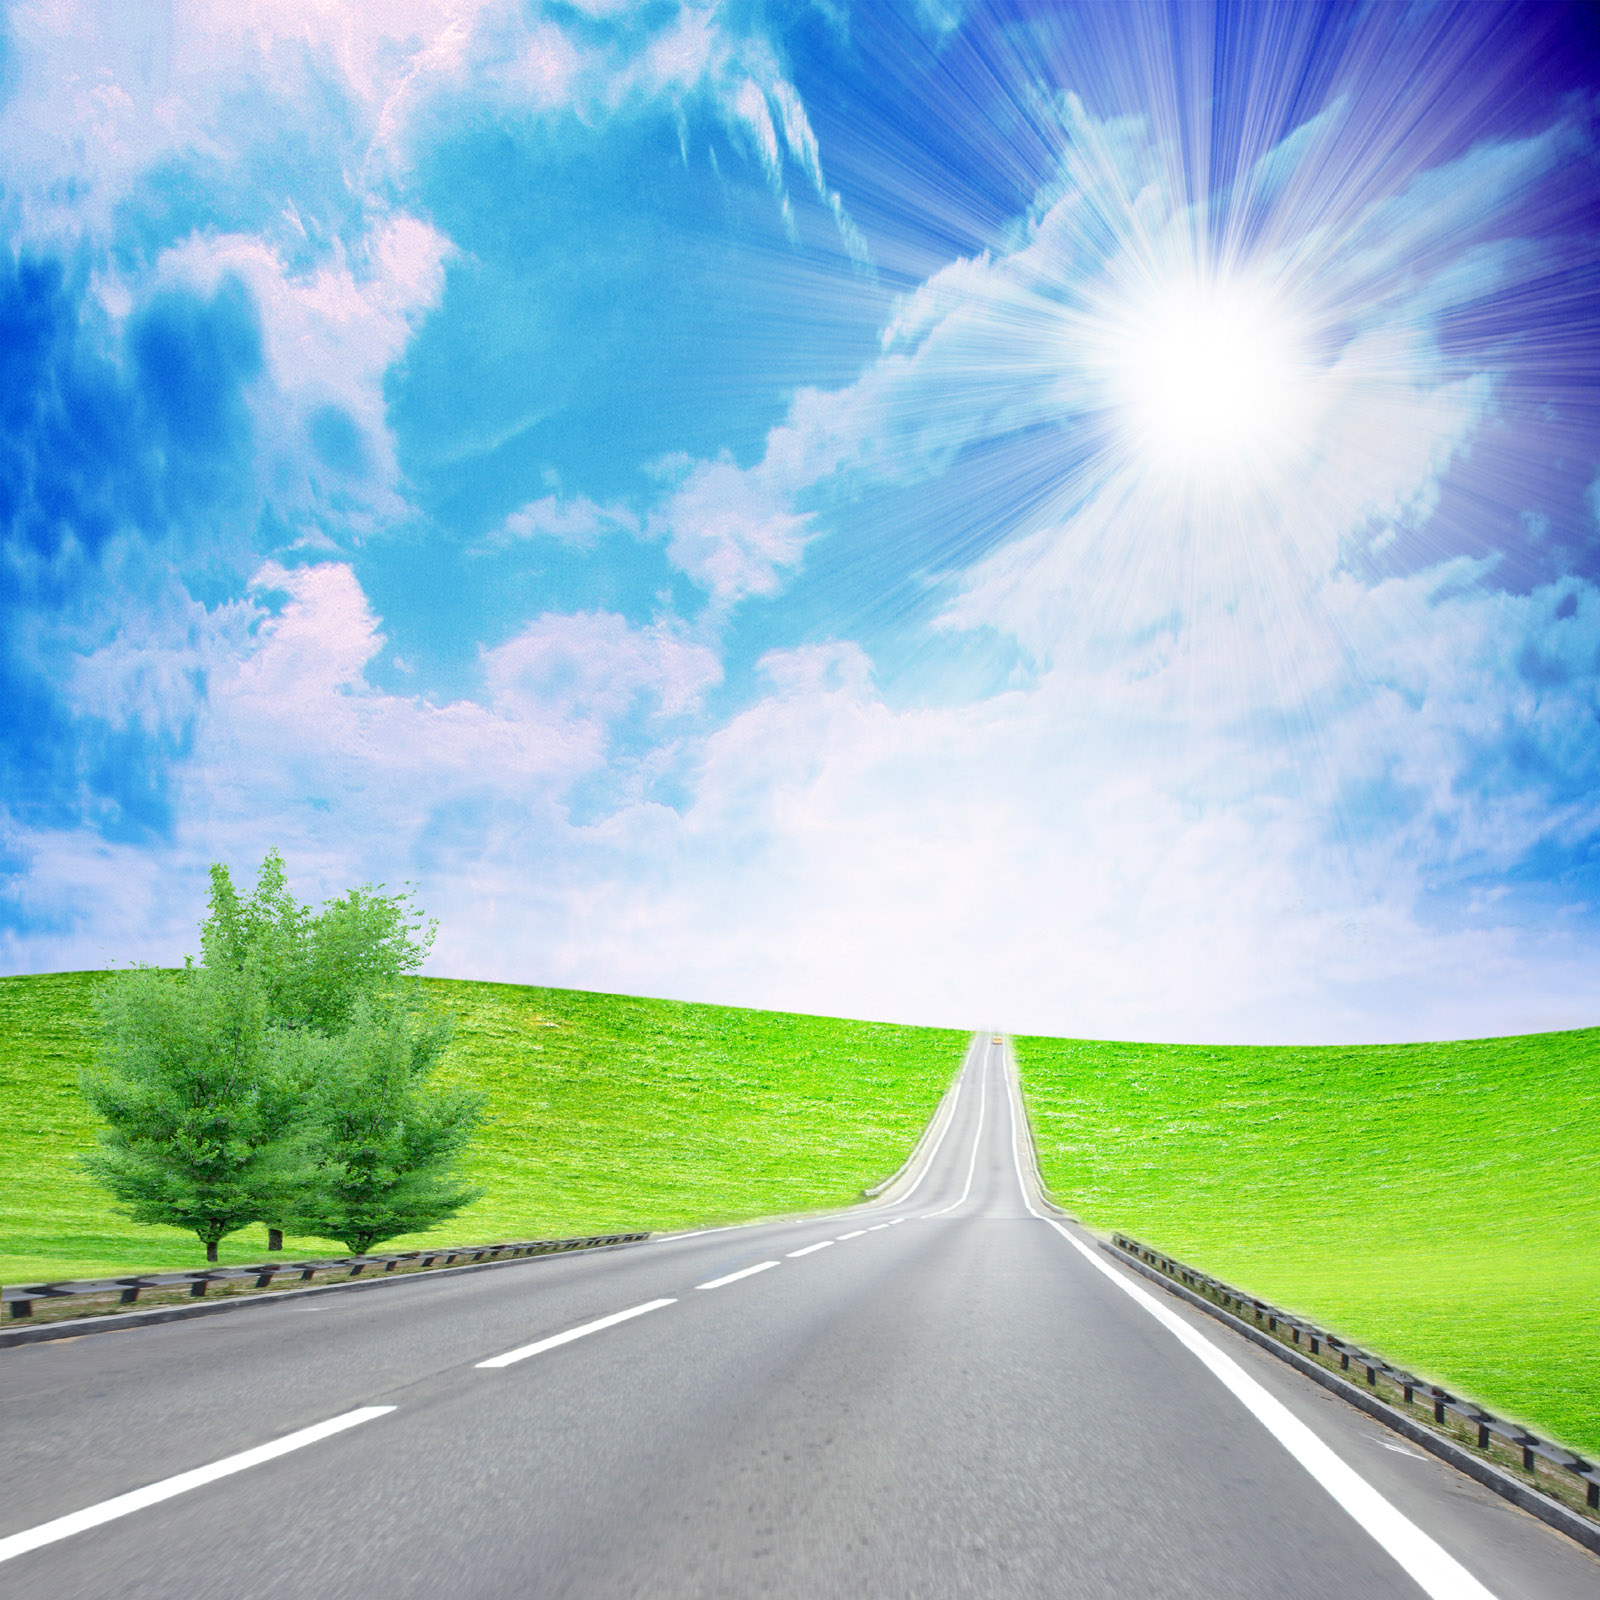 Blue sky and the road 15076 - Green sky - Landscape scenery